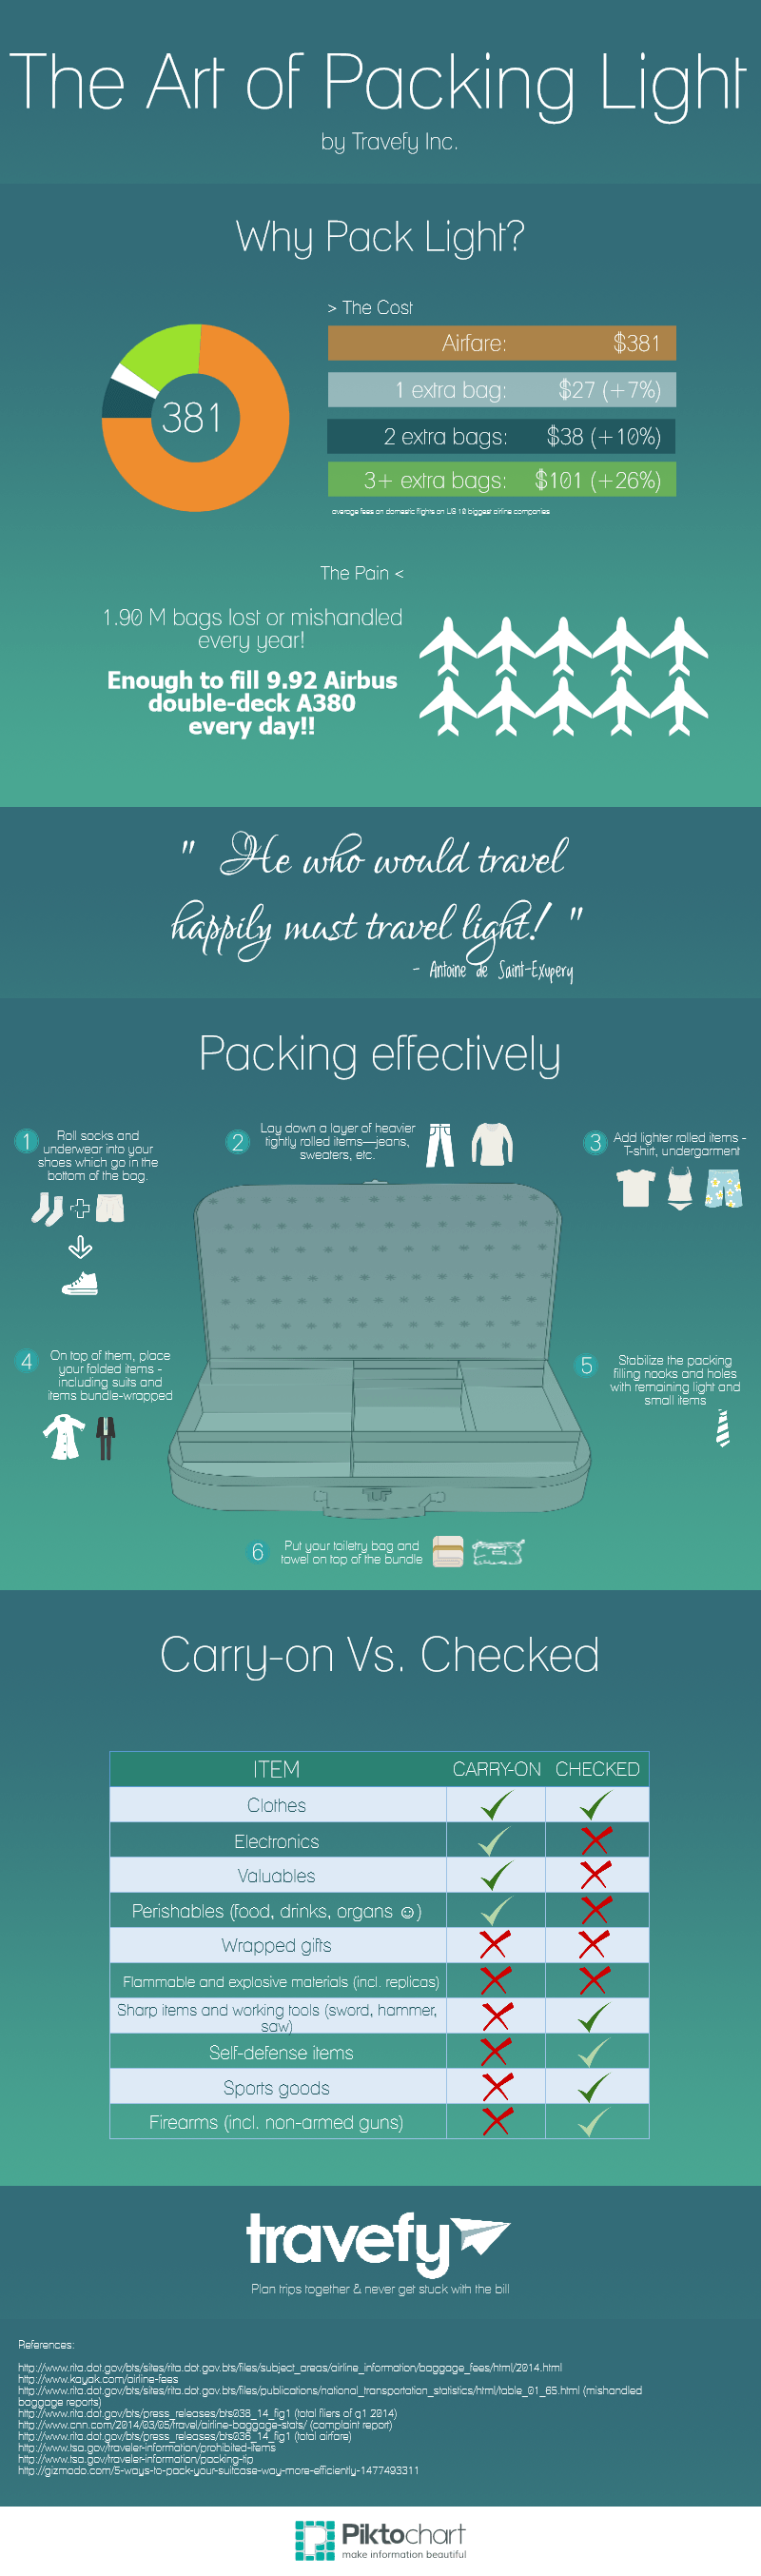 The Art of Packing Light by Travefy